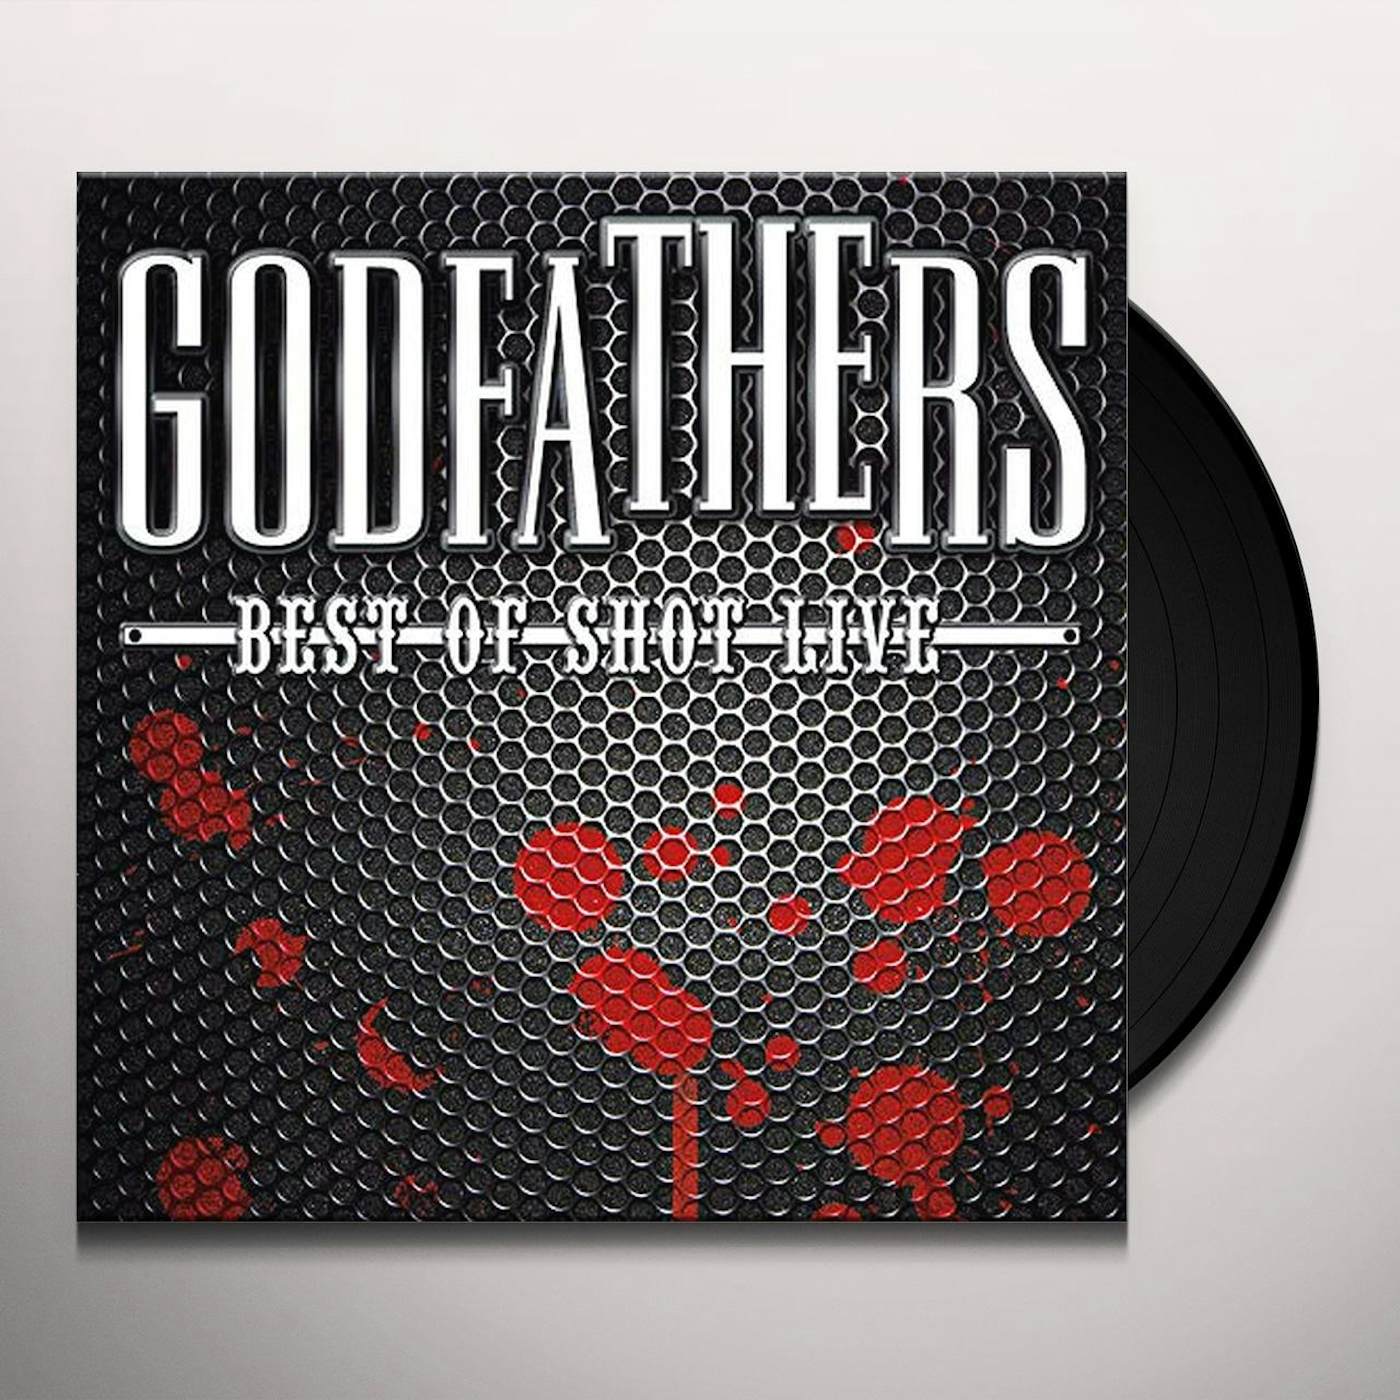 The Godfathers Best of Shot Live Vinyl Record